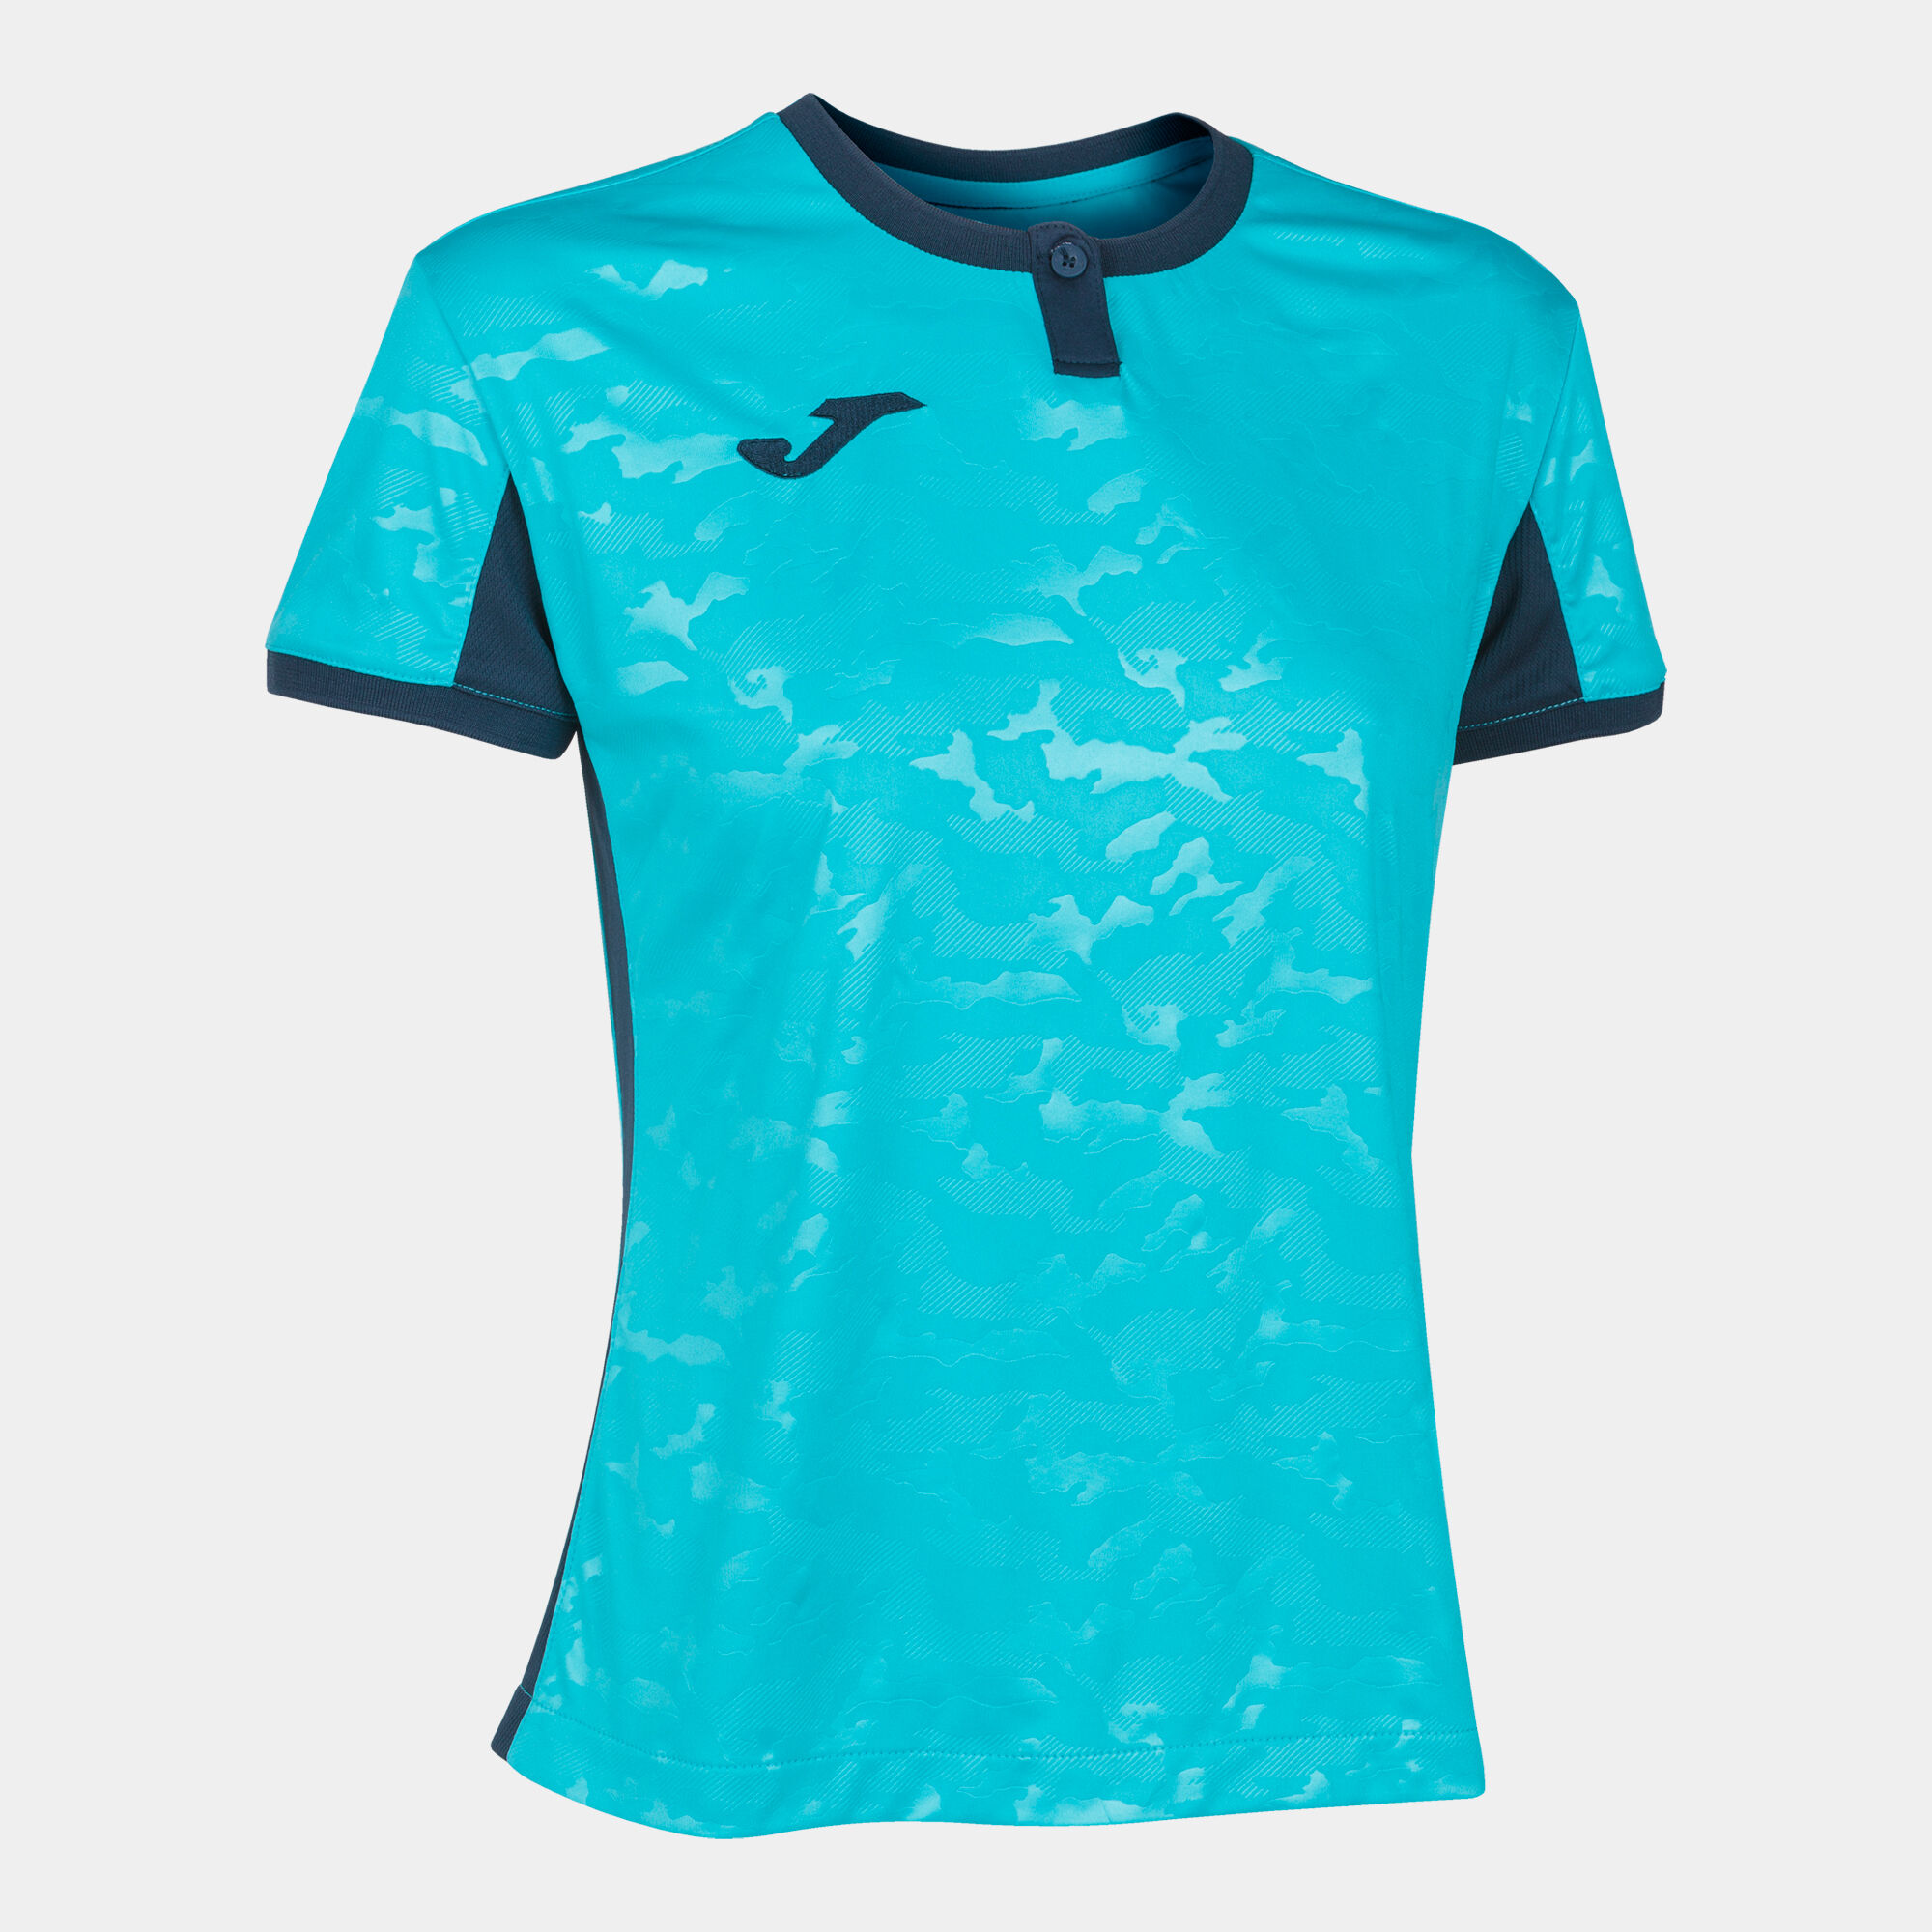 Maillot manches courtes femme Toletum II turquoise fluo bleu marine